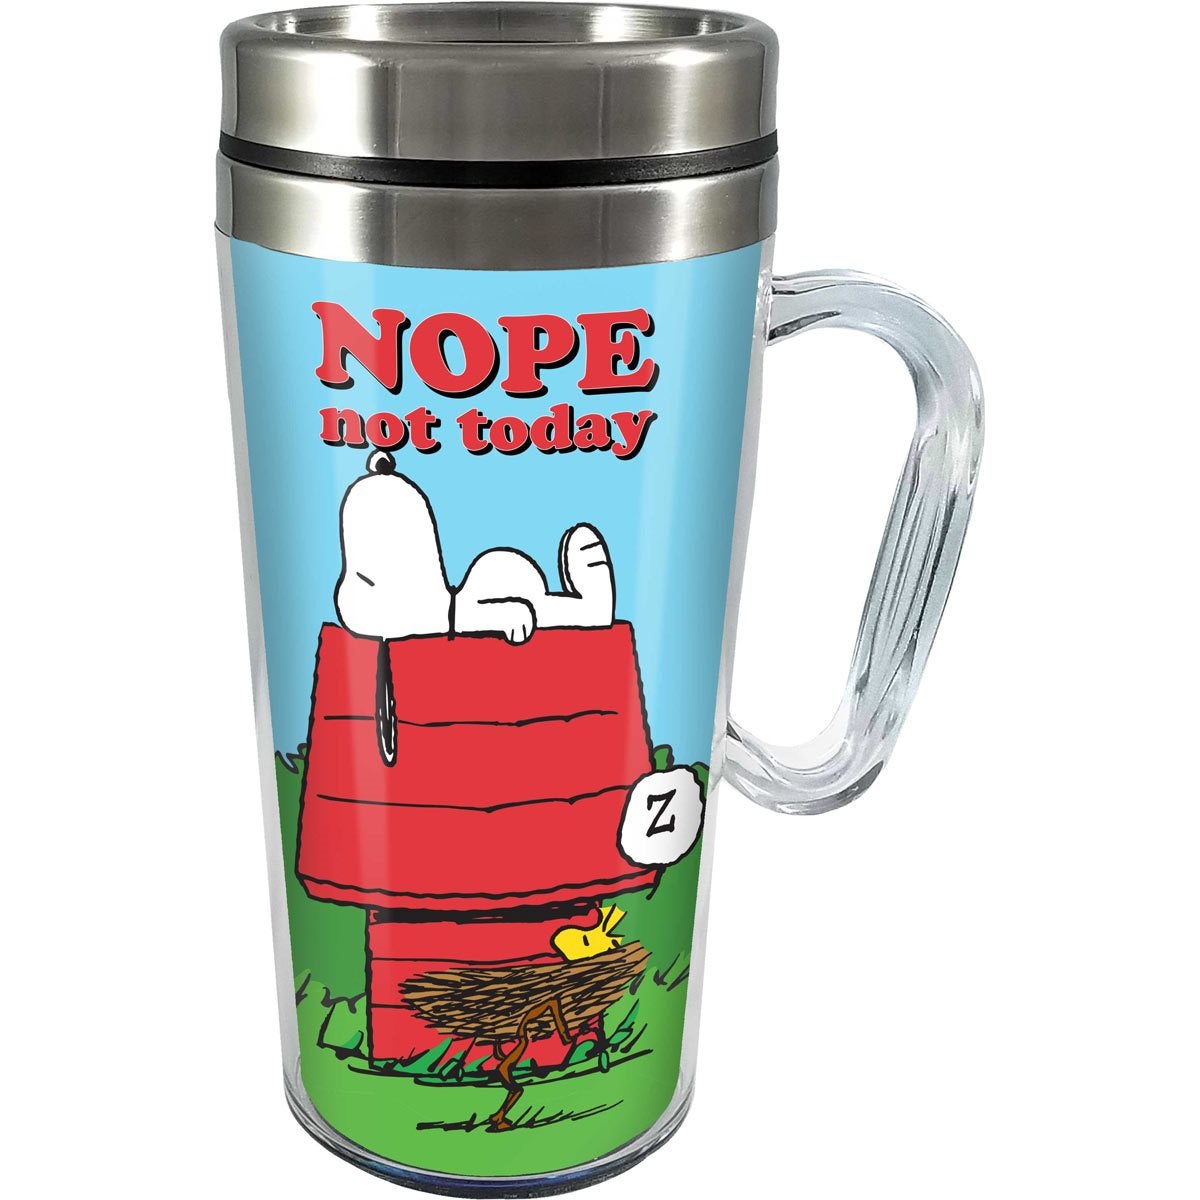 Peanuts Snoopy Nope Not Today Stainless Steel Travel Mug - 14 oz.